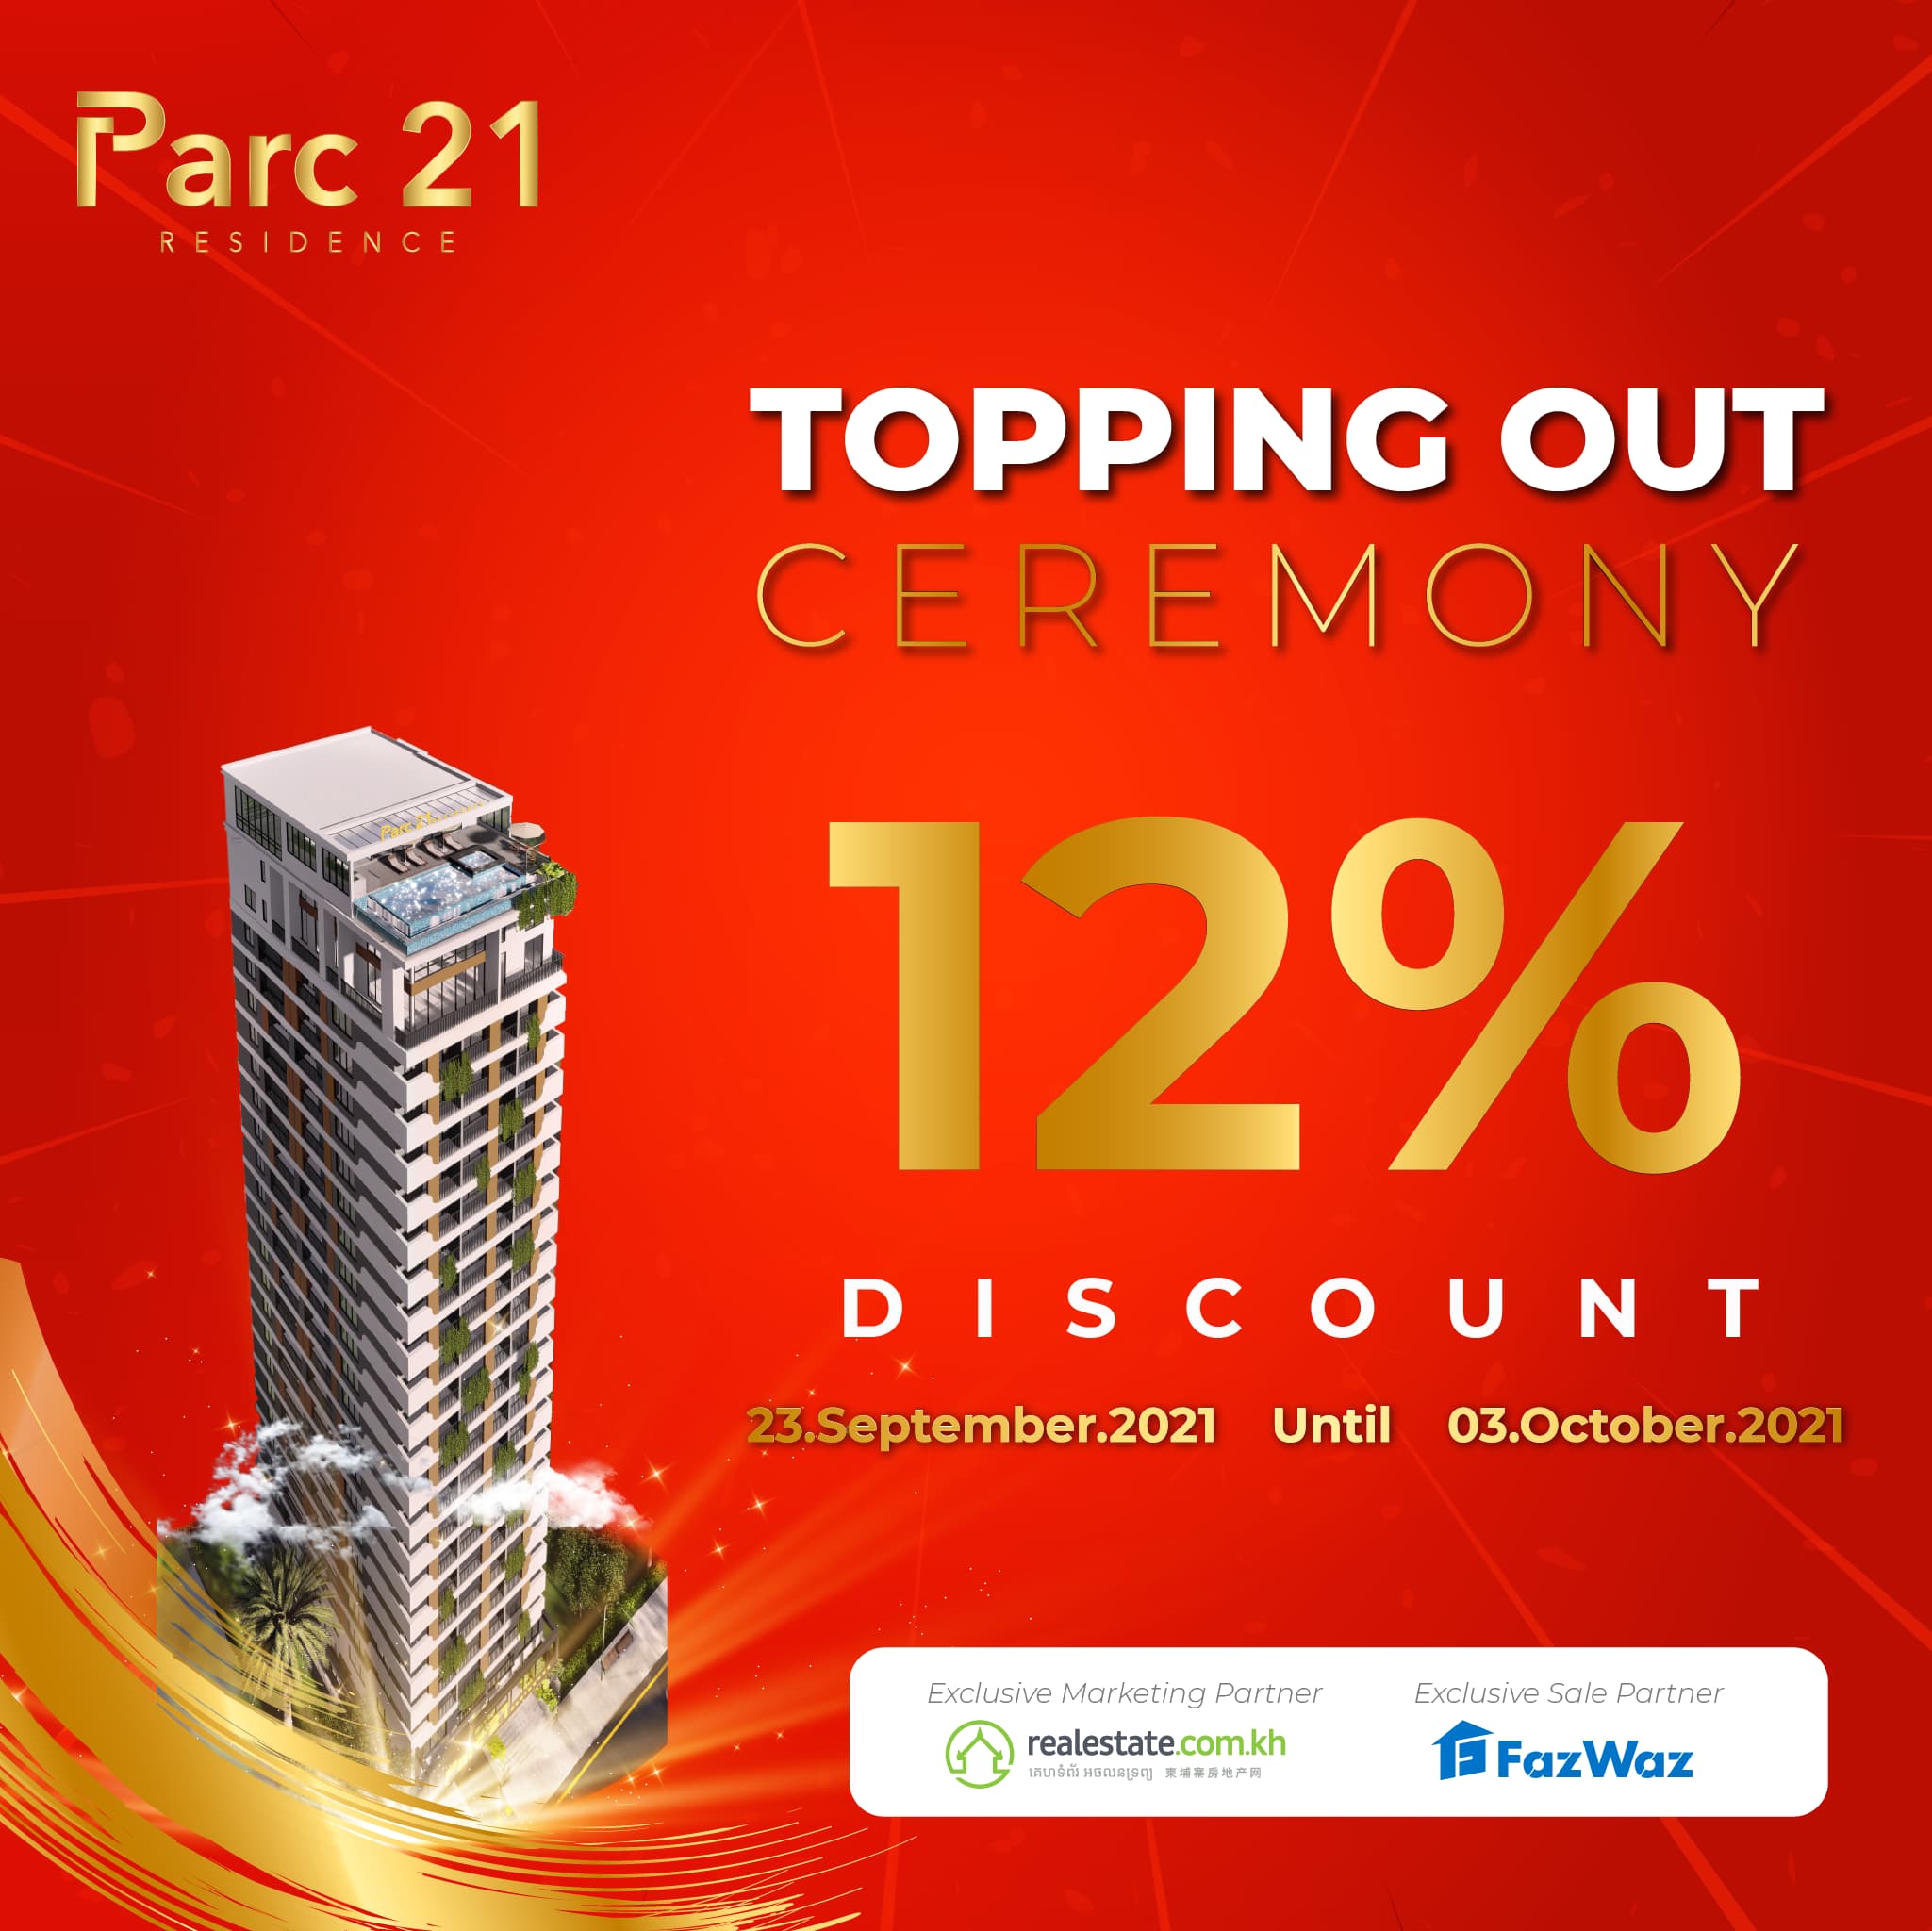 Another 2 units closed during the PARC 21 topping out celebration, with just 3 days to go!